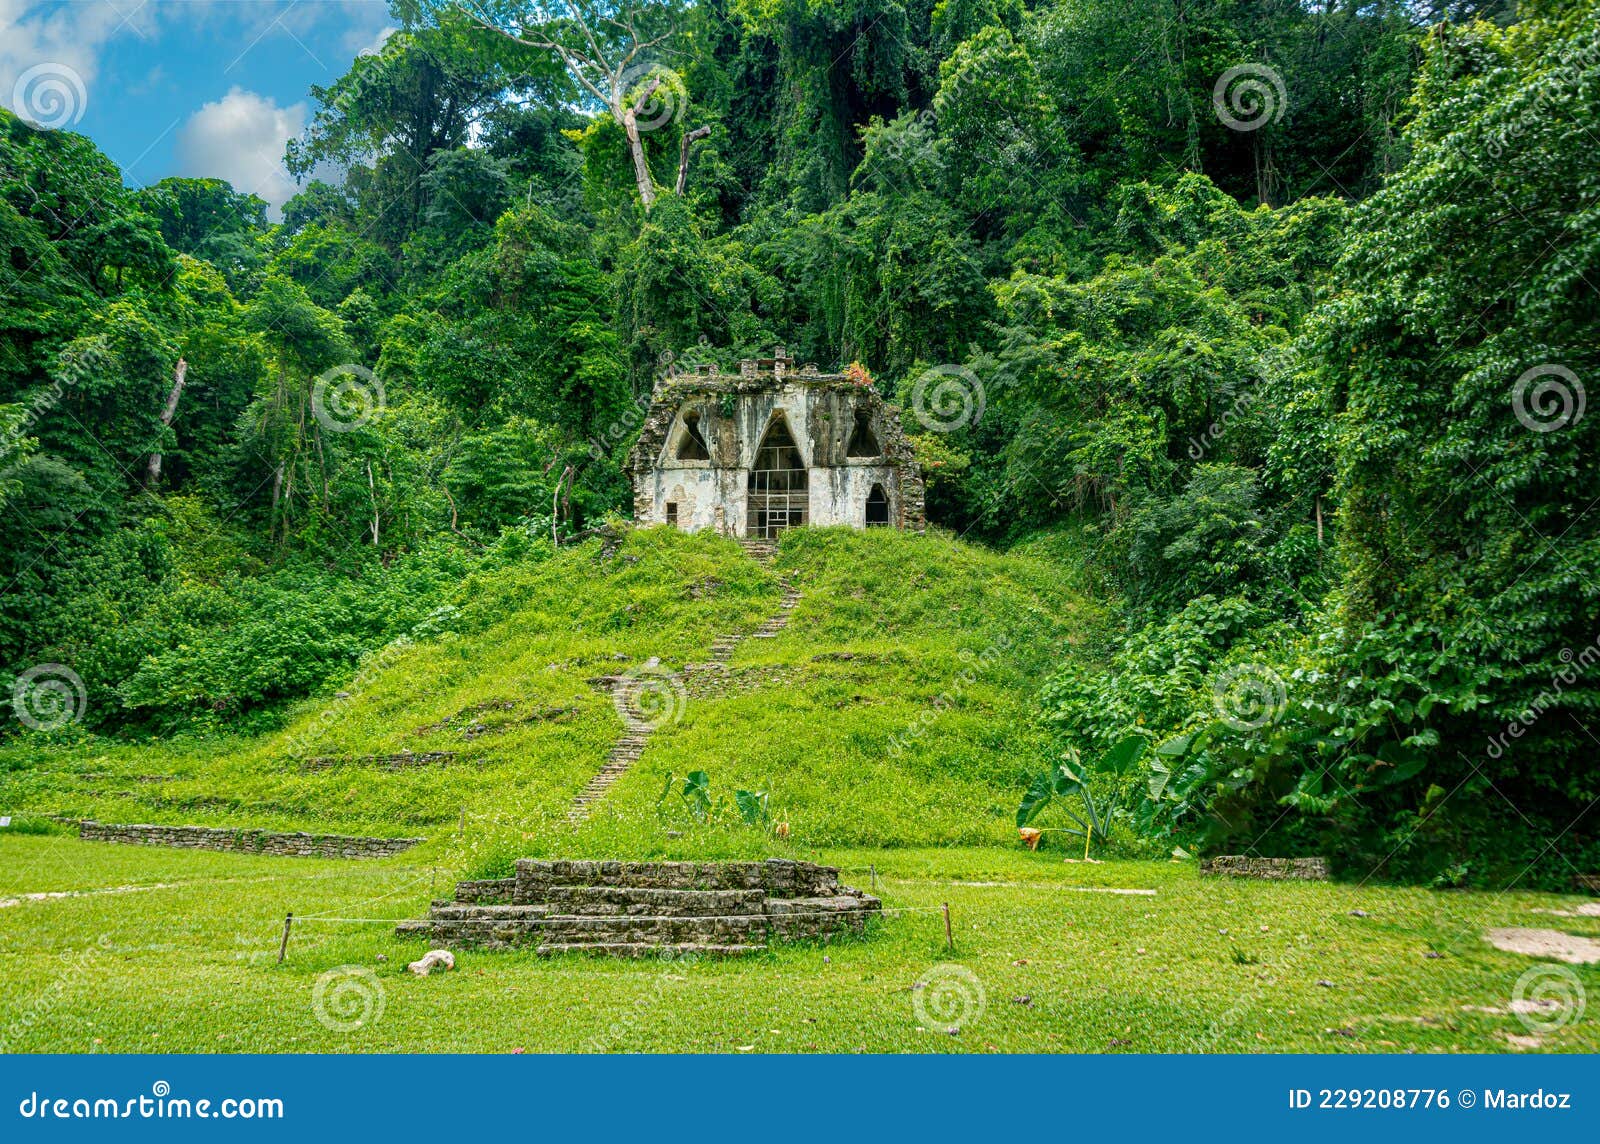 temple of the foliated cross, palenque, chiapas, mexico